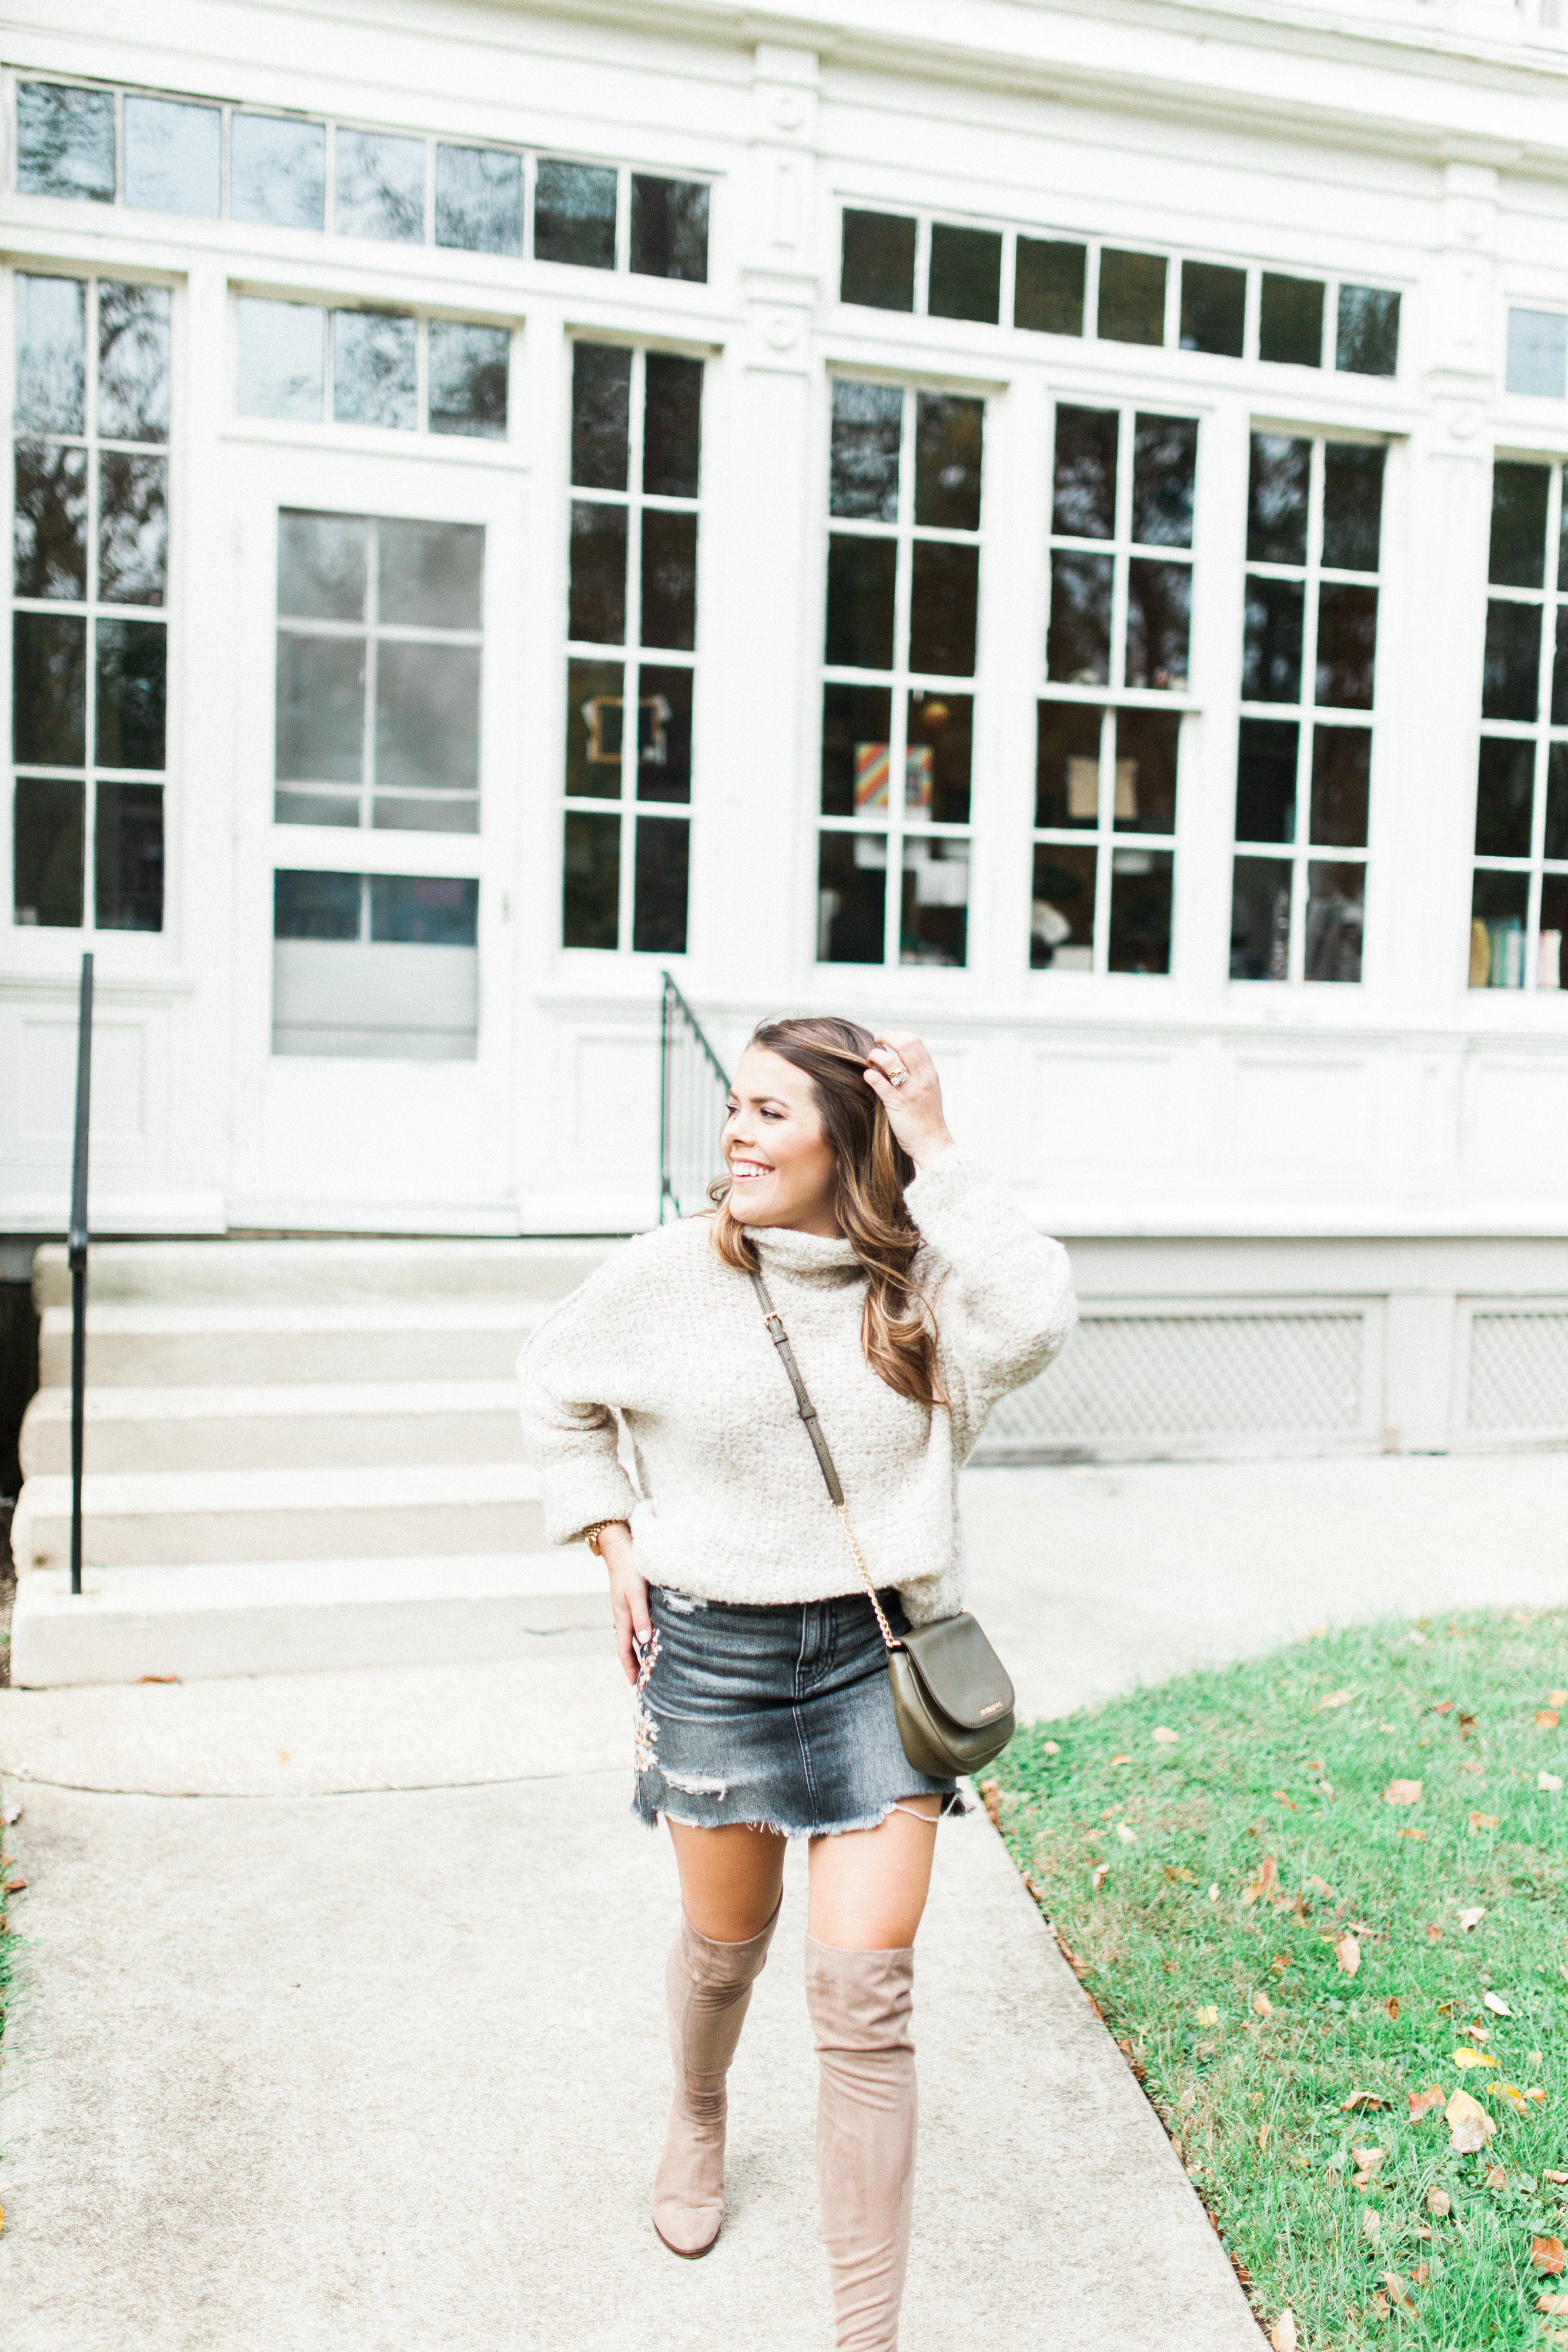 Embroidered Denim Skirt for fall / fall outfit idea 